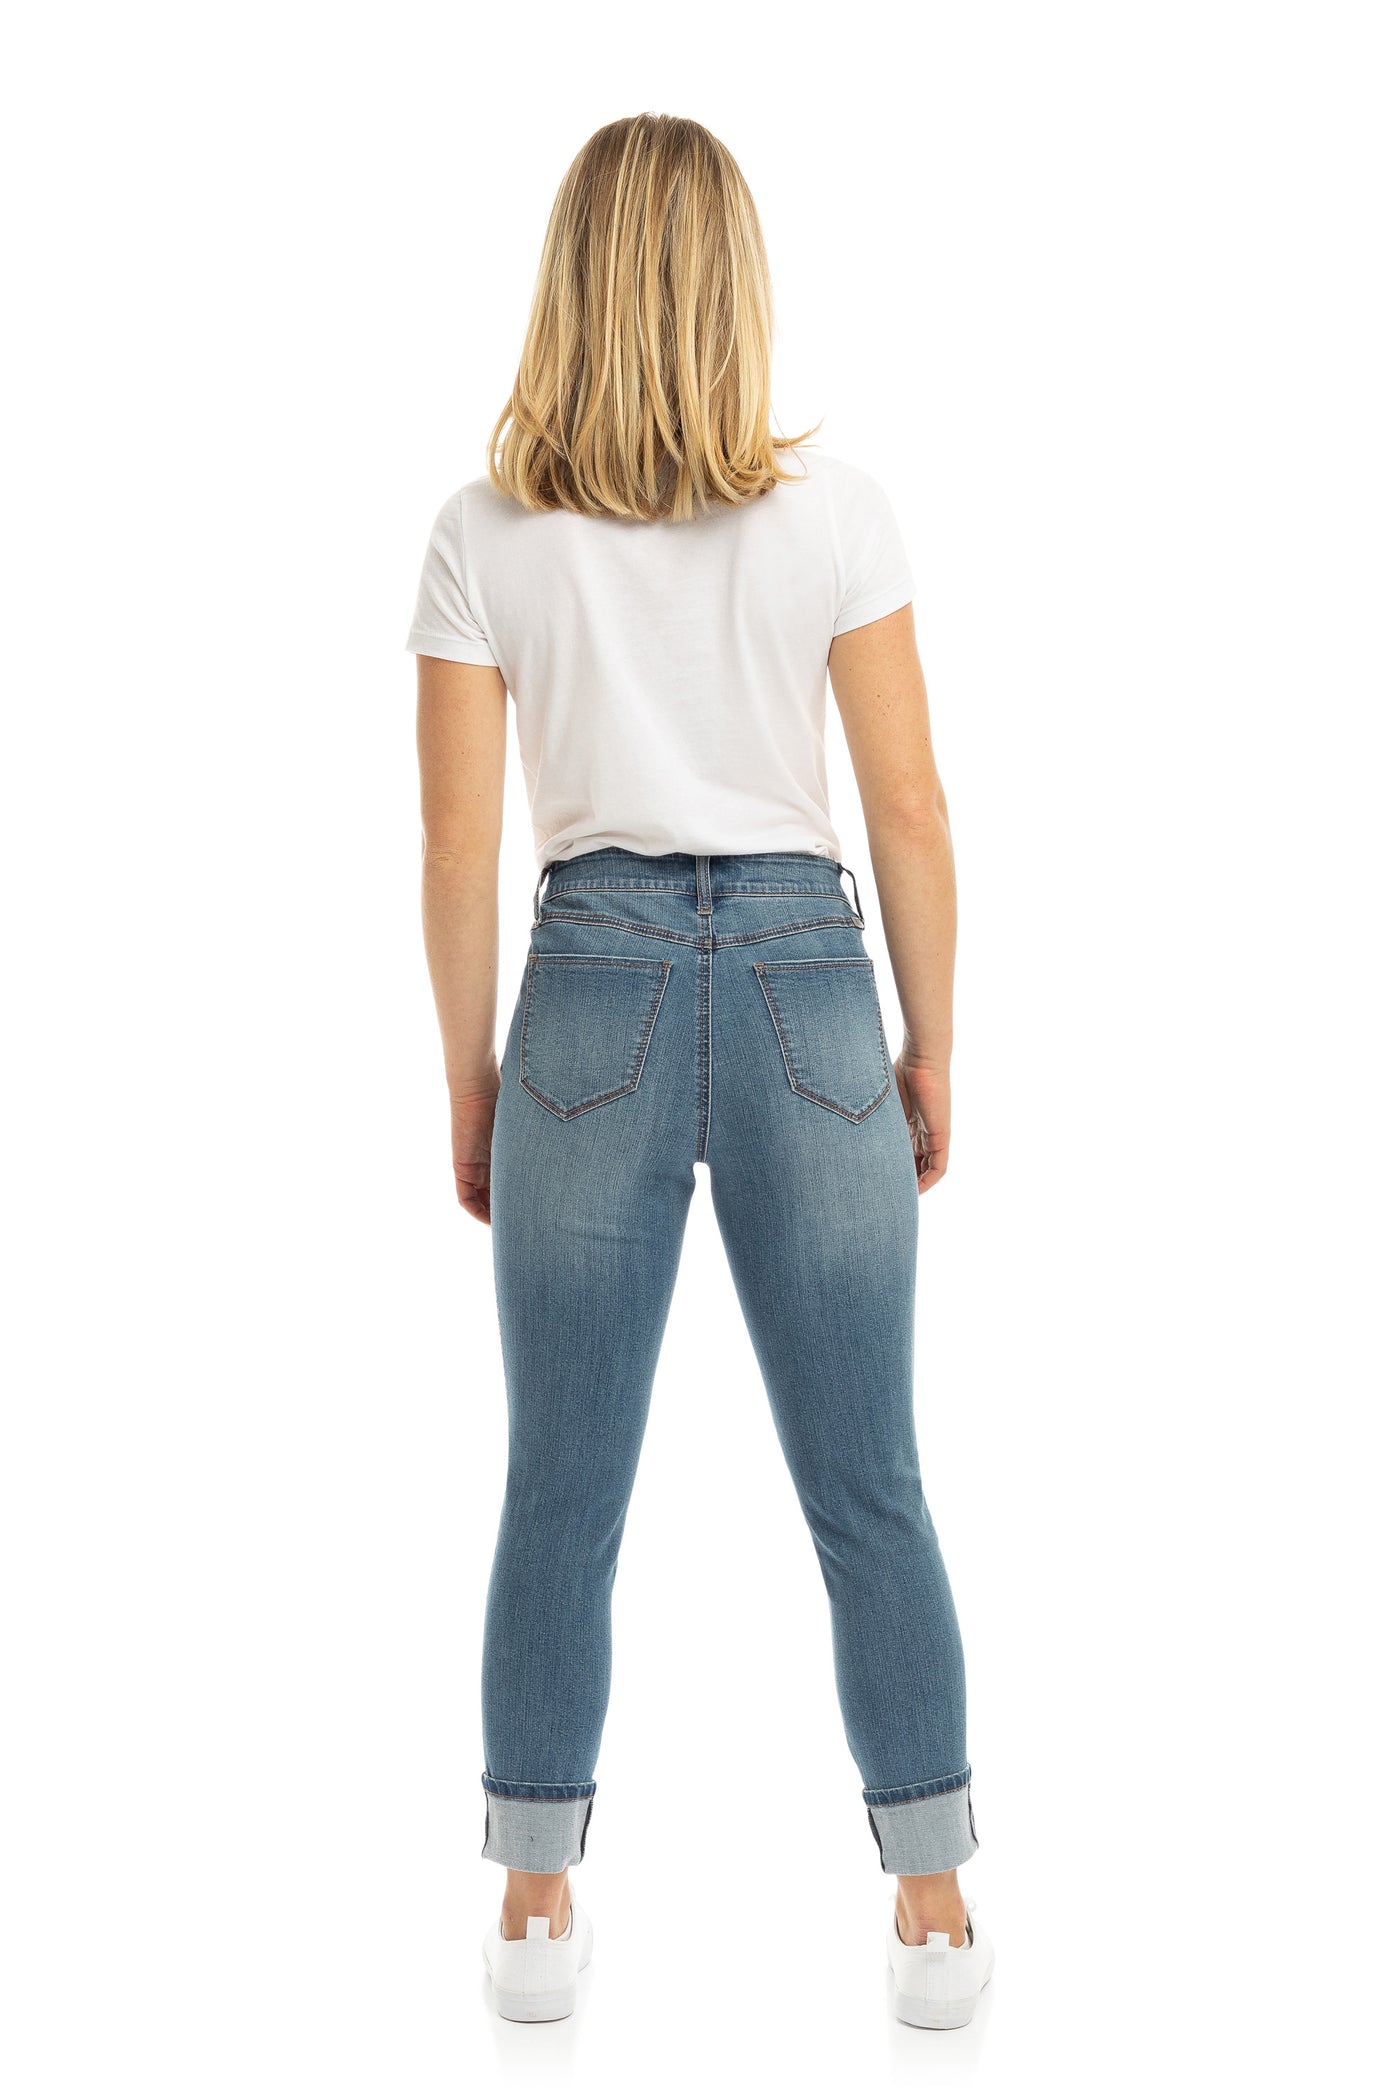 Petite Vintage Cuff Jean in Isabelle